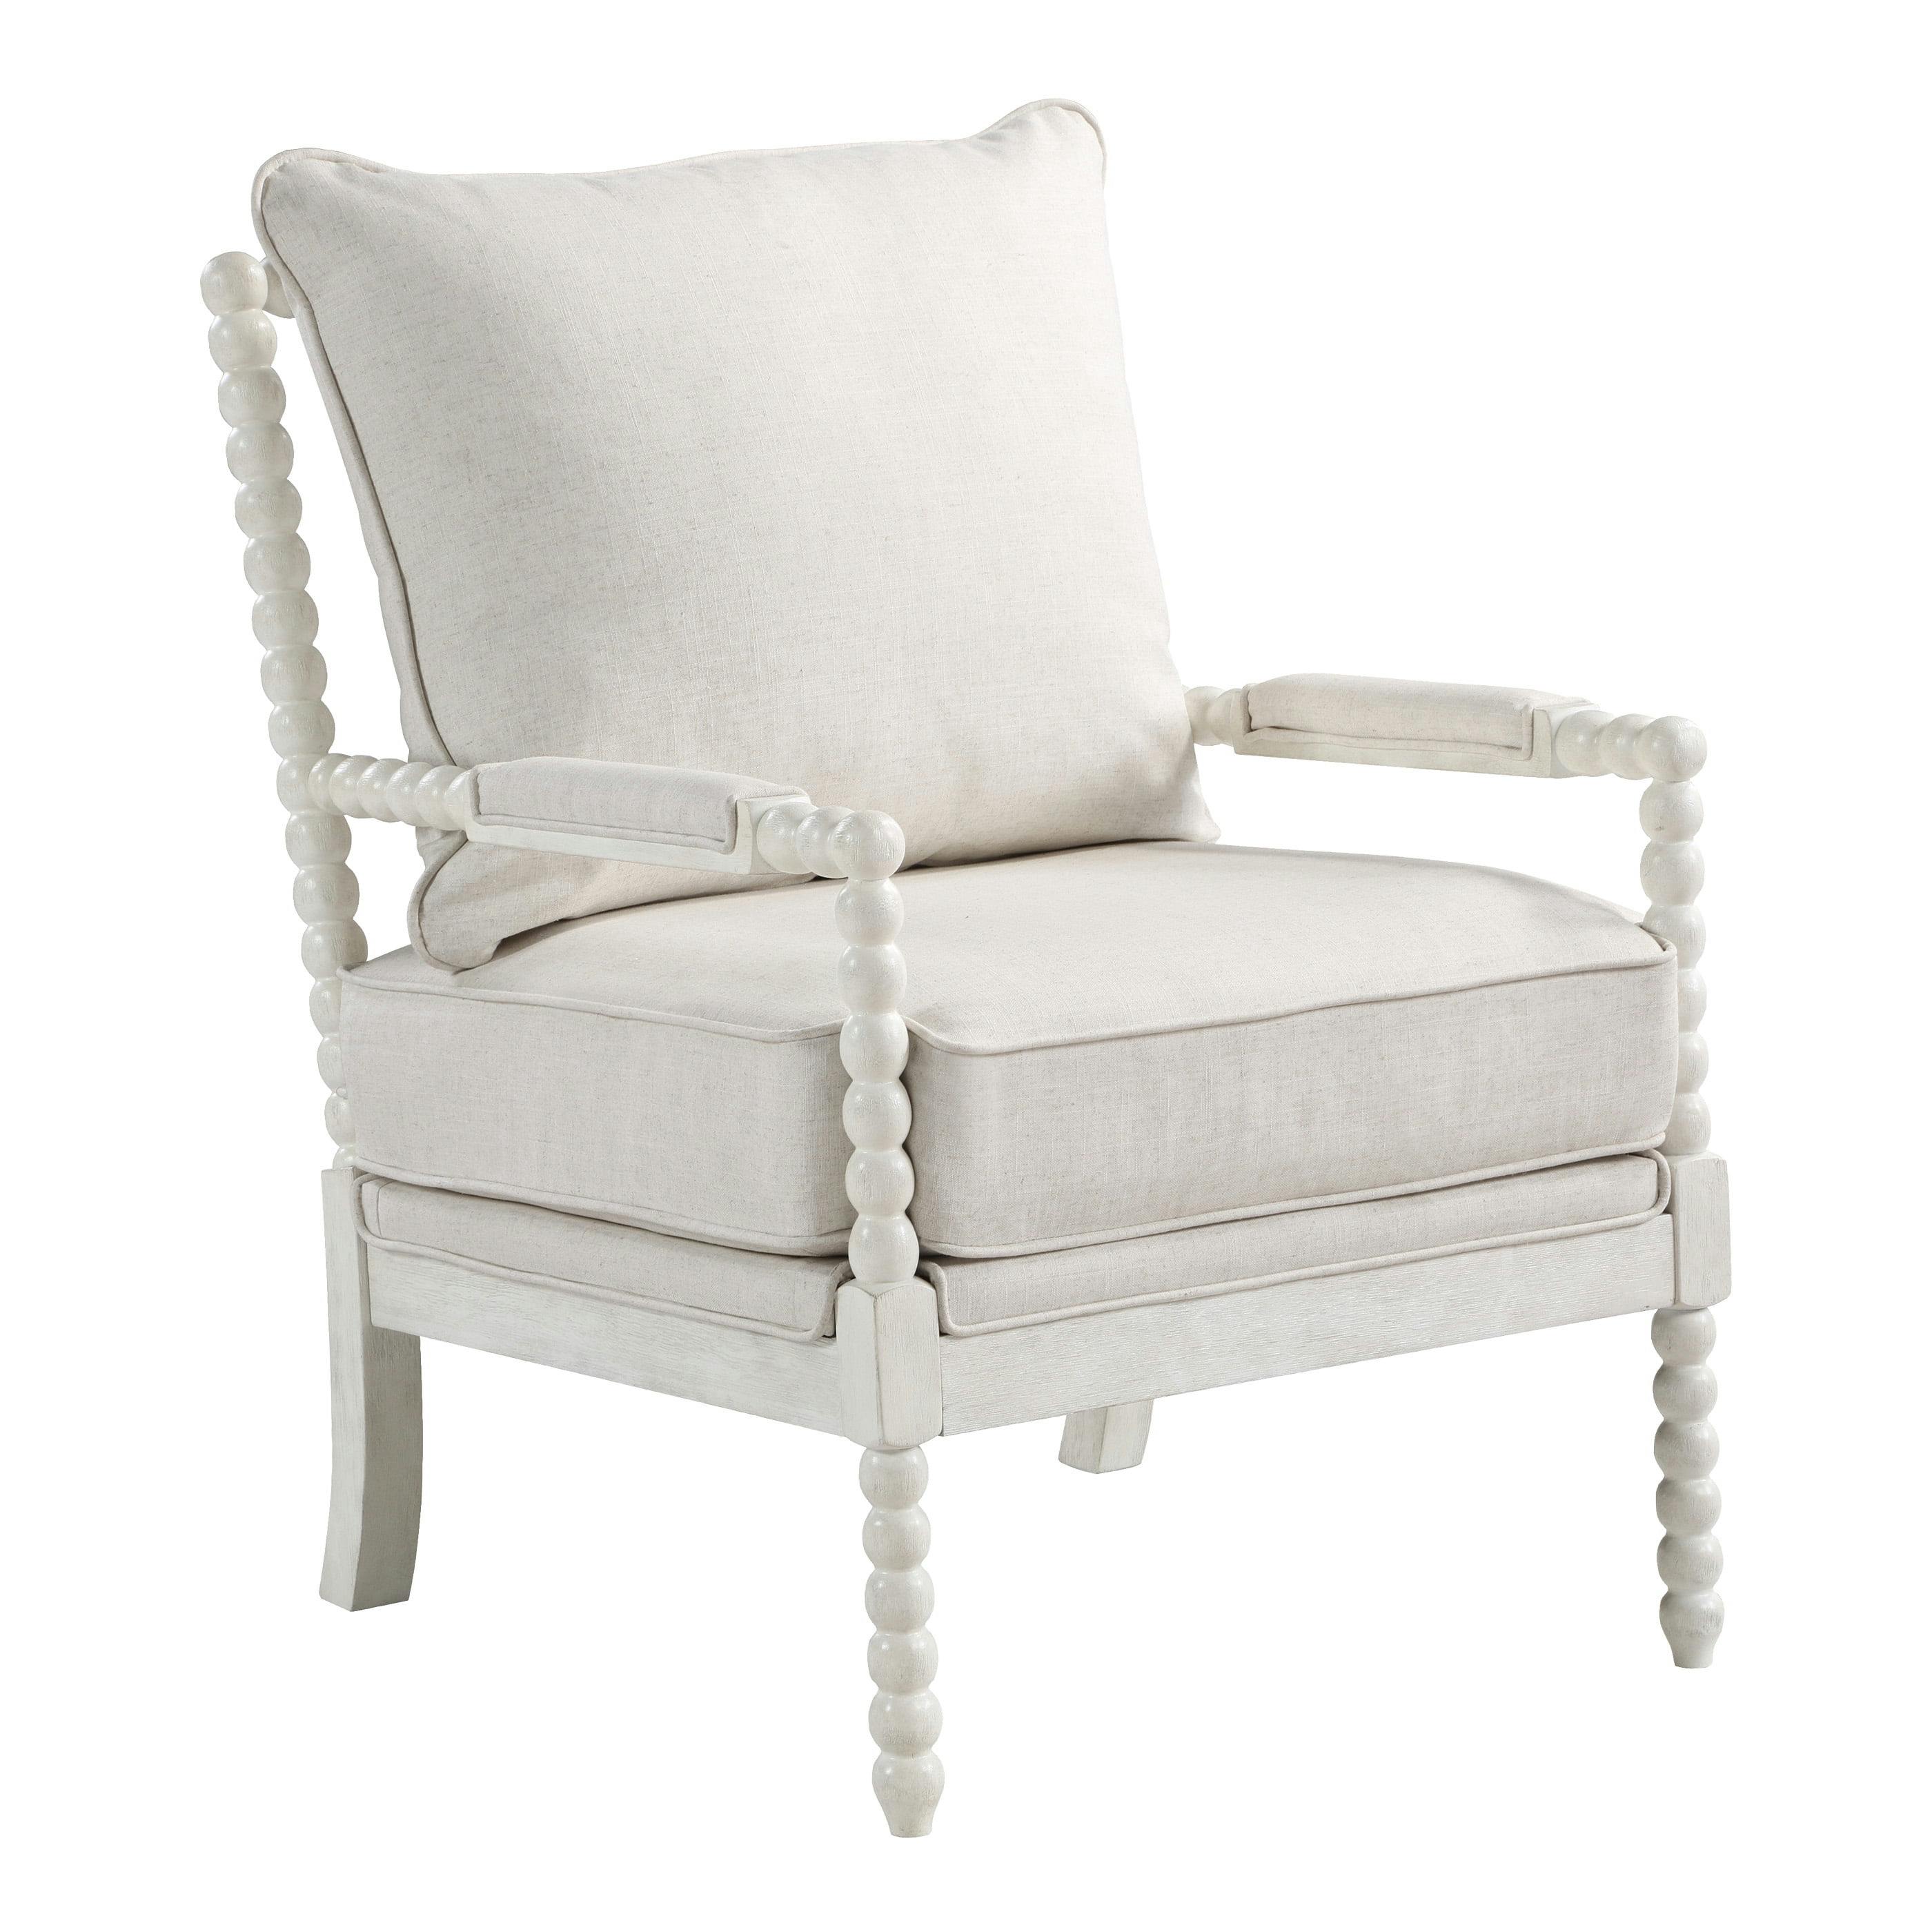 Kaylee Linen Beige Spindle Chair with White Wood Frame